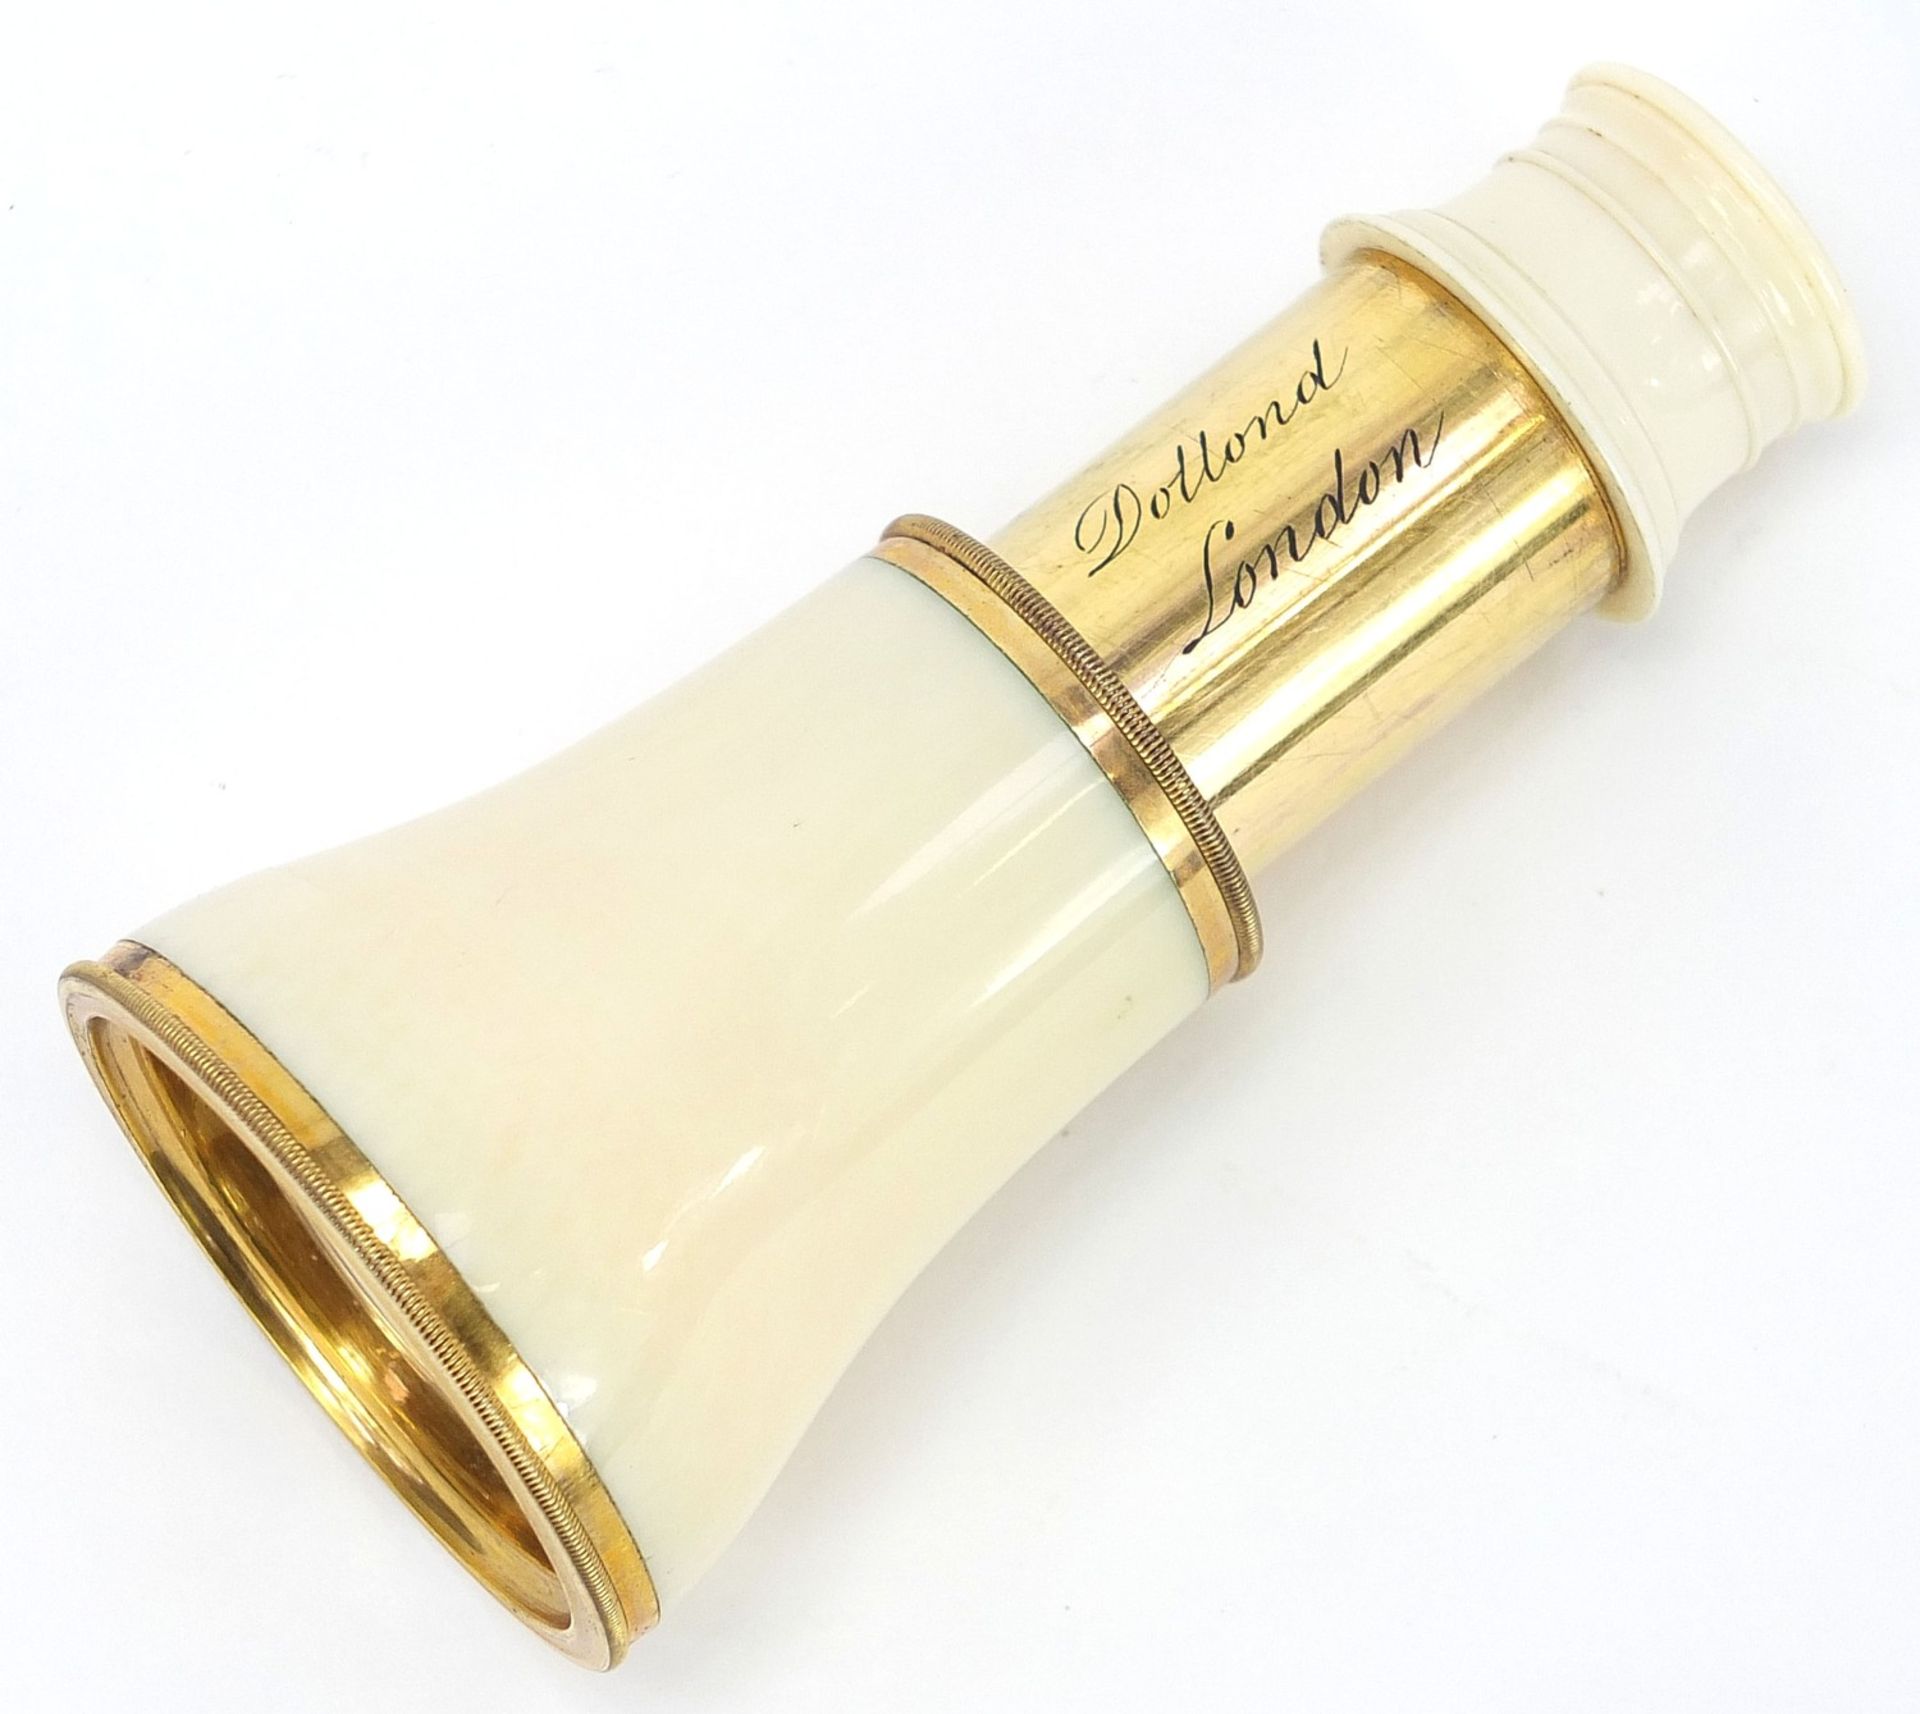 Dolland of London, early 19th century ivory and brass monocular with silk lined leather case, 6. - Image 2 of 7